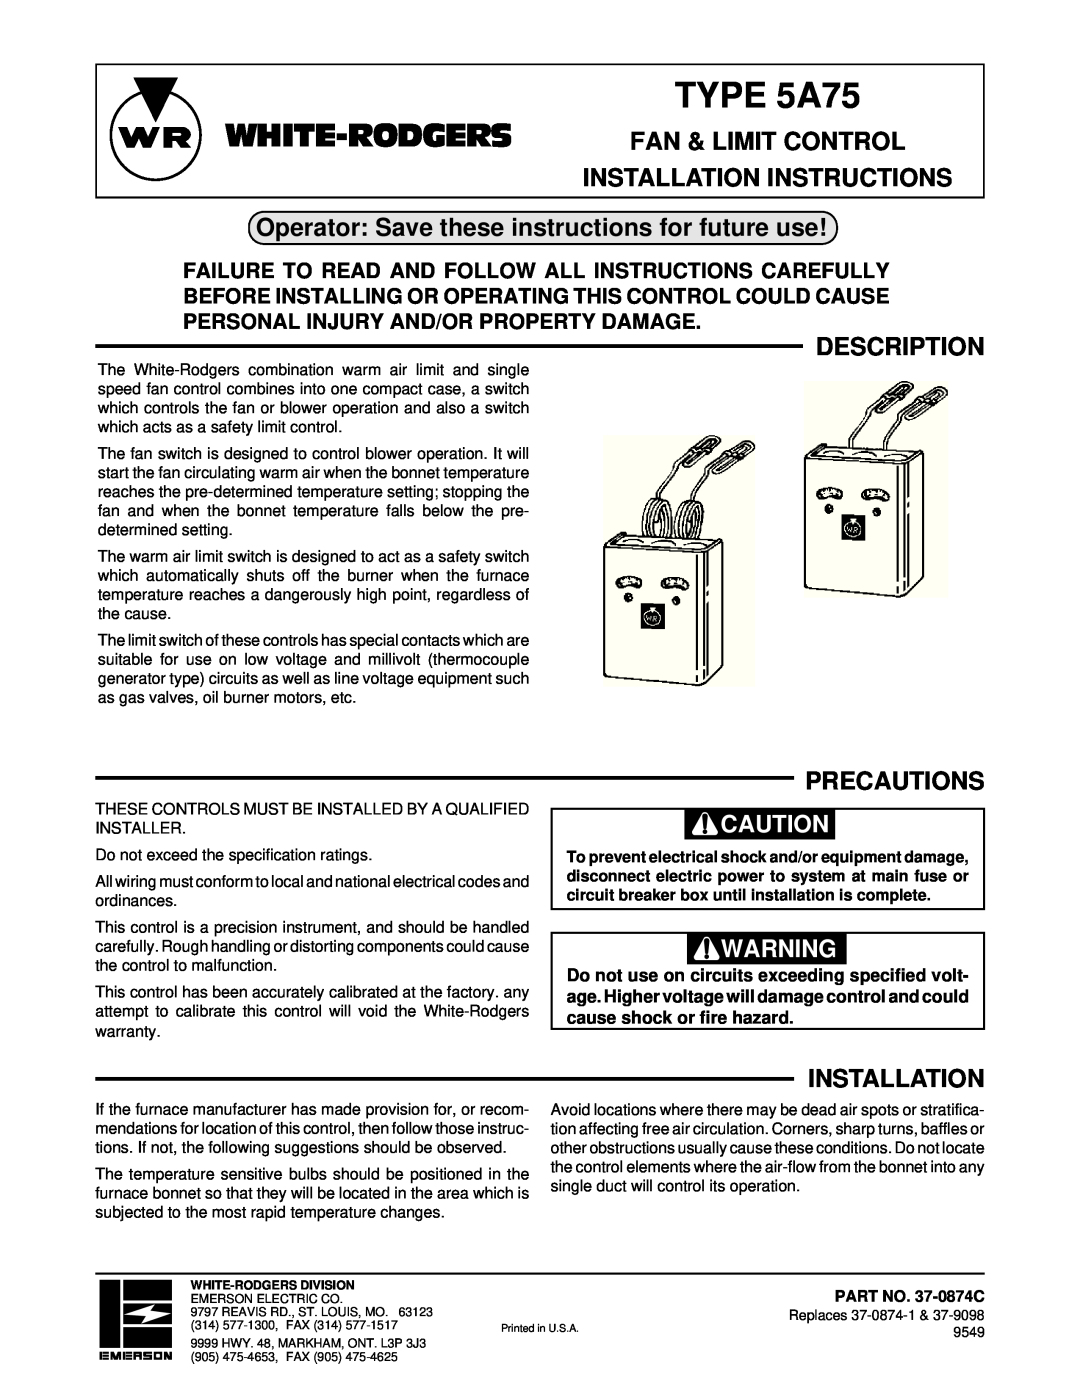 White Rodgers 5A75 installation instructions White-Rodgers, Fan & Limit Control Installation Instructions, Description 